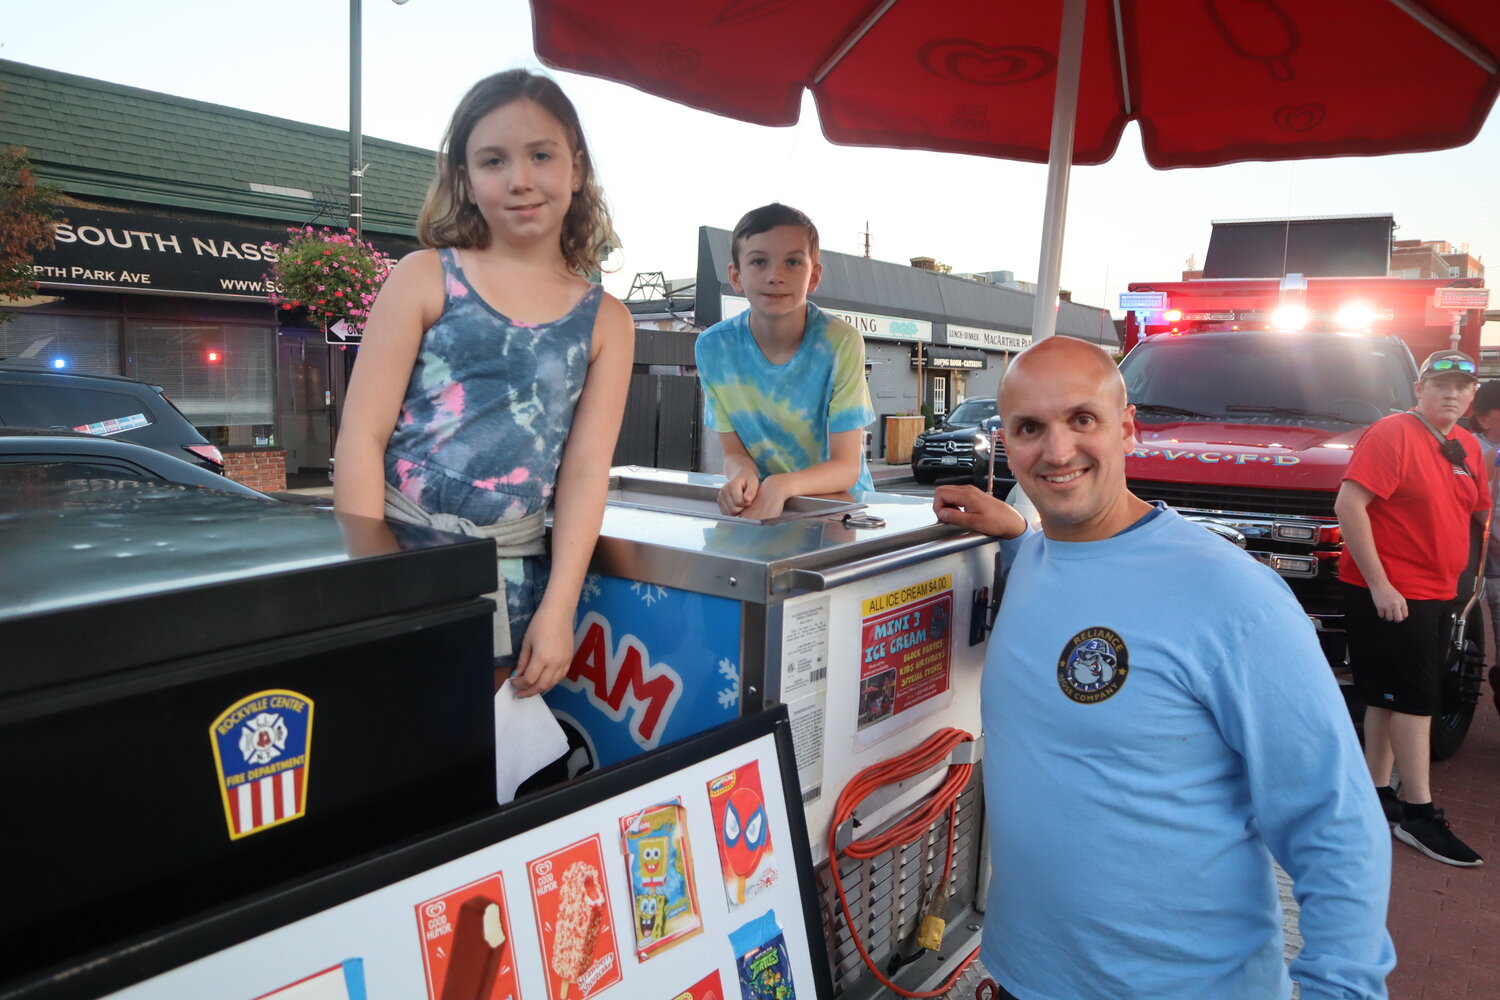 Michael Blackford with Reliance Hose Company No. 3 and his two kids, Lily and Liam, help give out ice cream to the kids during the tree lighting ceremony on Aug. 31.